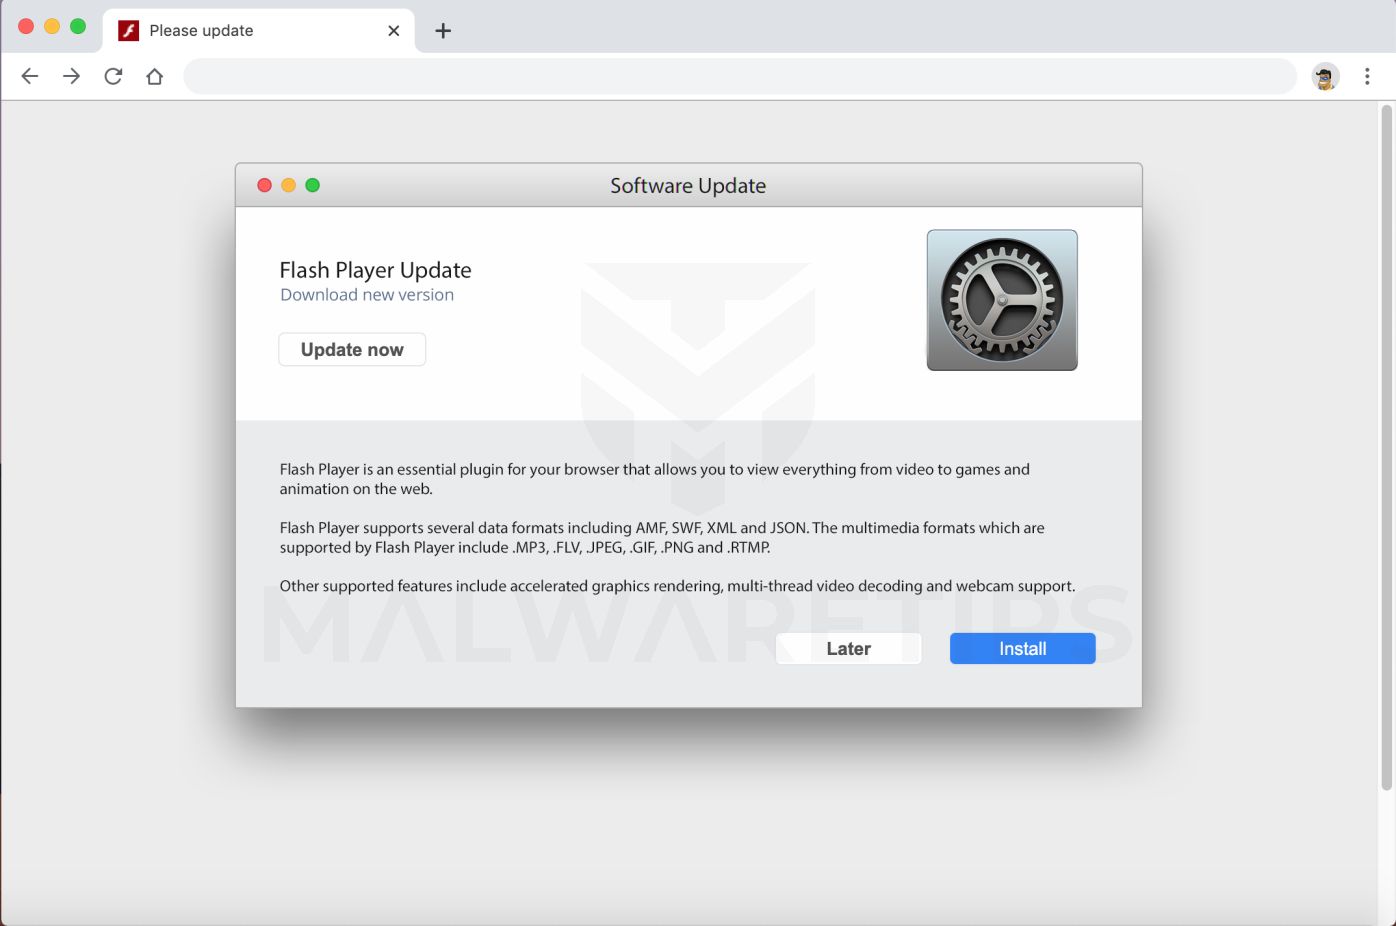 get rid of adware cleaner popup on mac